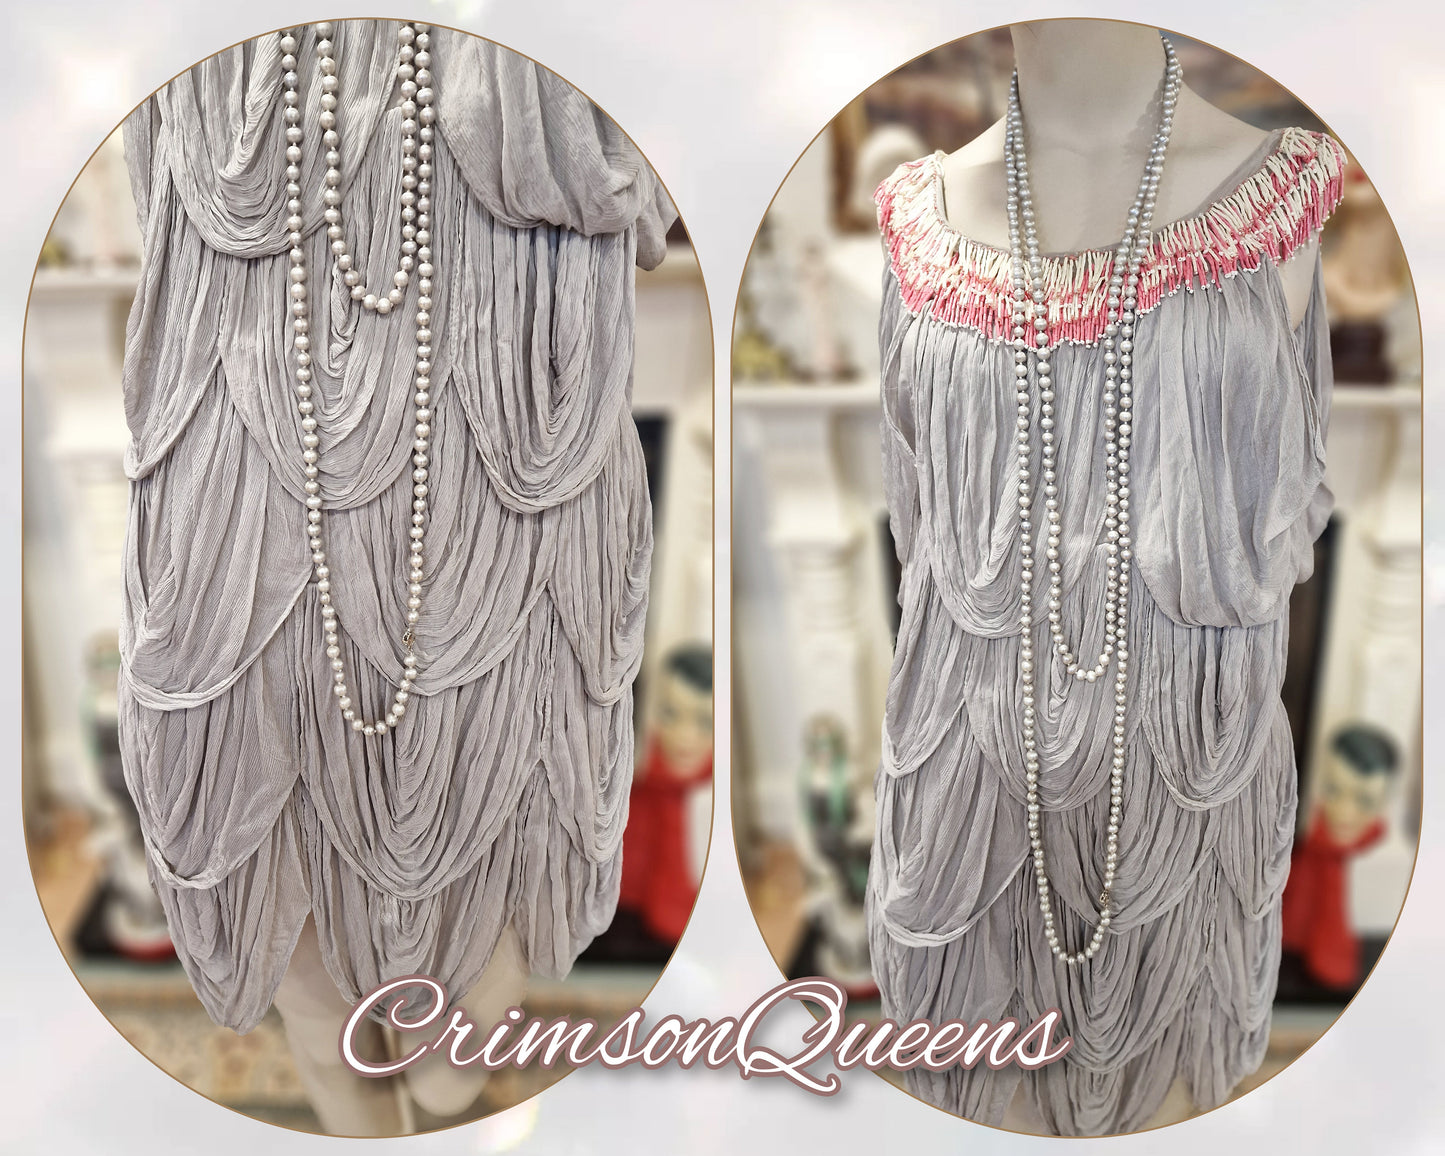 Vintage silver grey oyster ruffled frilled all silk flapper Great Gatsby 1920s flapper gypsy bohemian style dress size UK 8 US 4